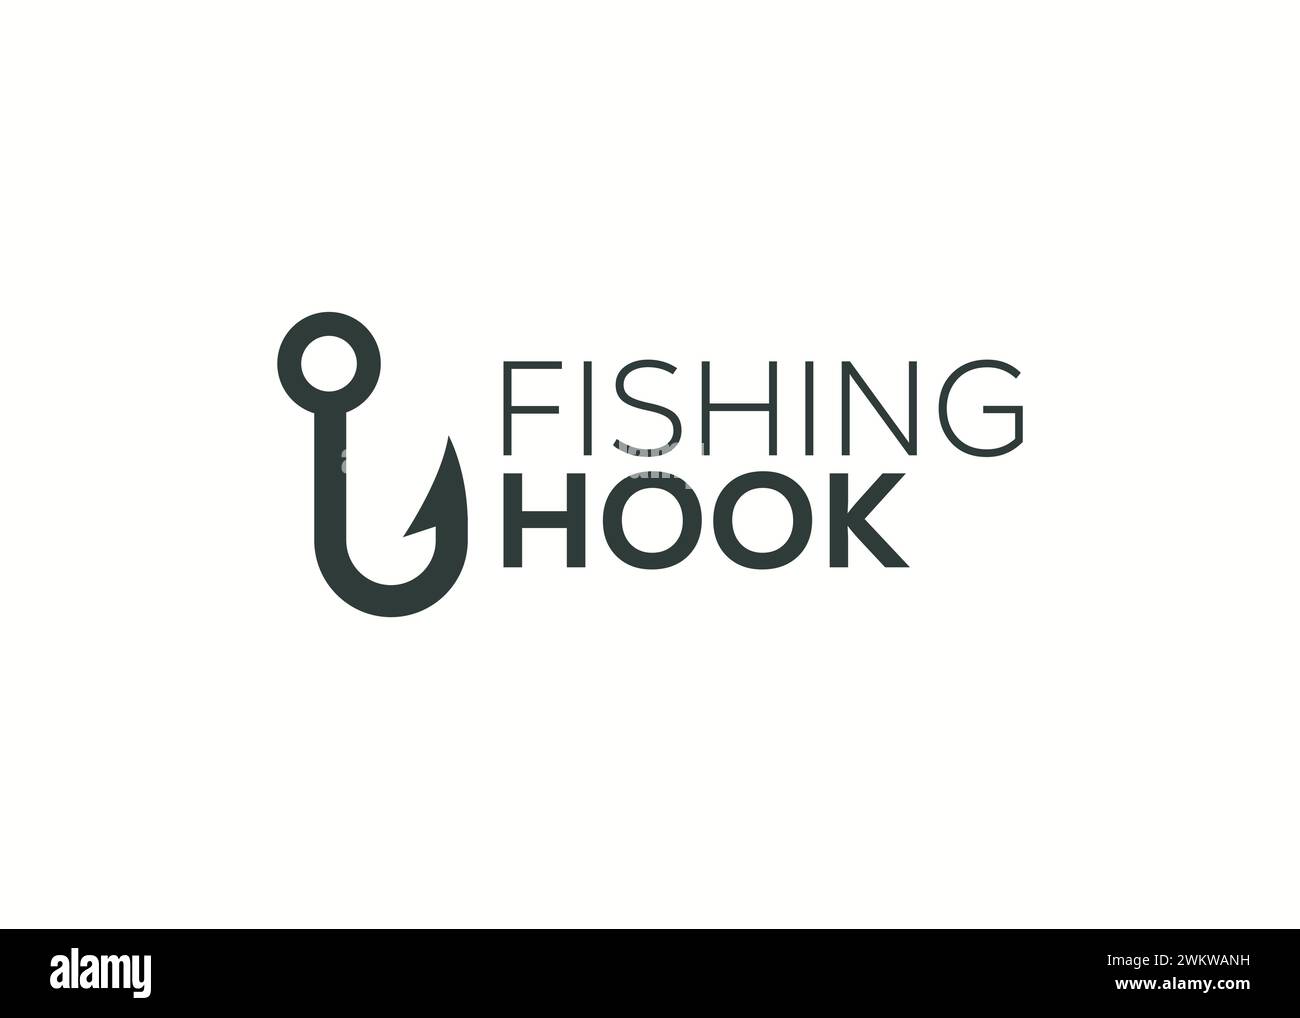 Hook logo Cut Out Stock Images & Pictures - Alamy